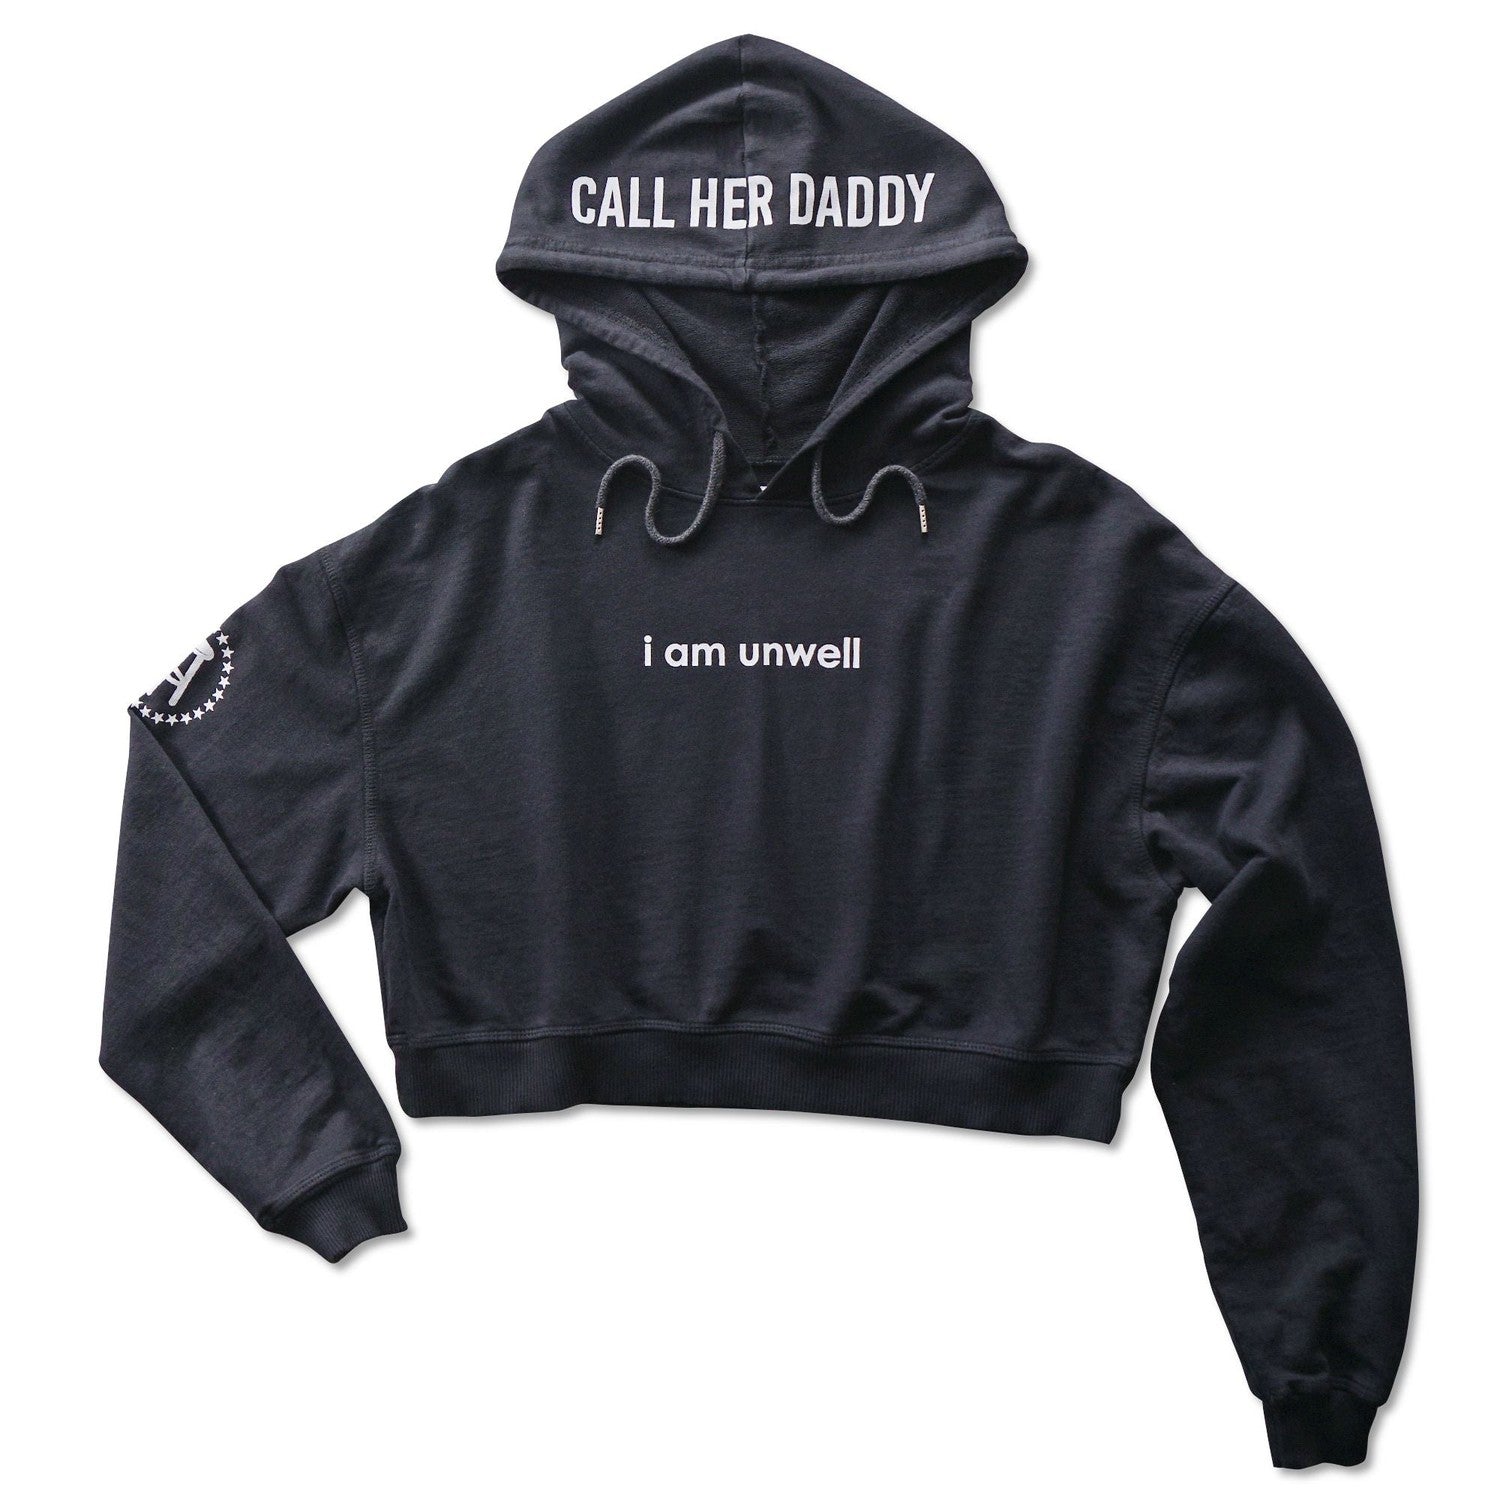 I Am Unwell Cropped Hoodie Black Call Her Daddy Clothing Merch Barstool Sports